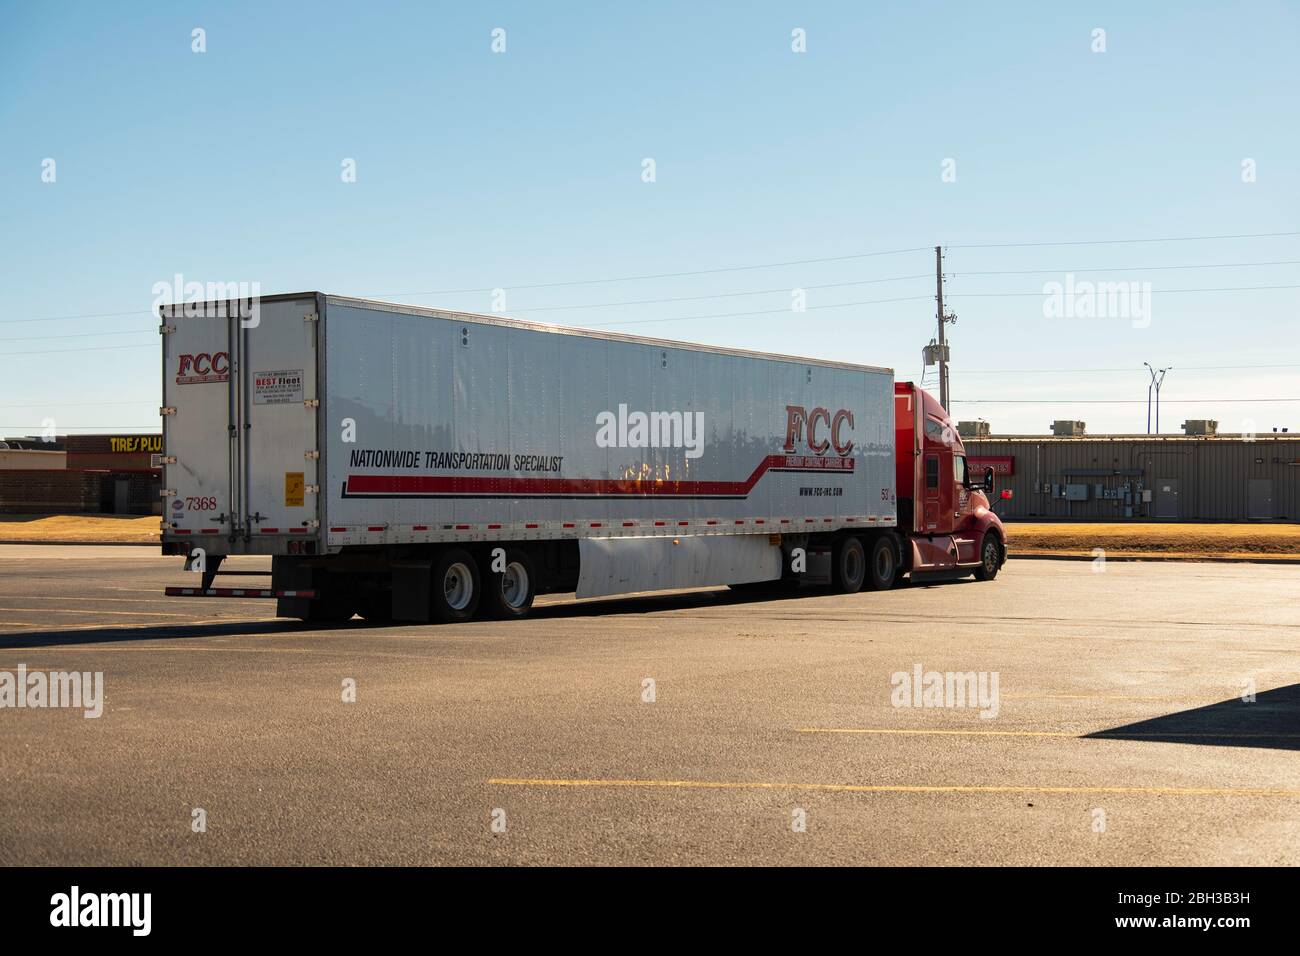 An FCC semi truck parked in a parking lot. USA. Stock Photo